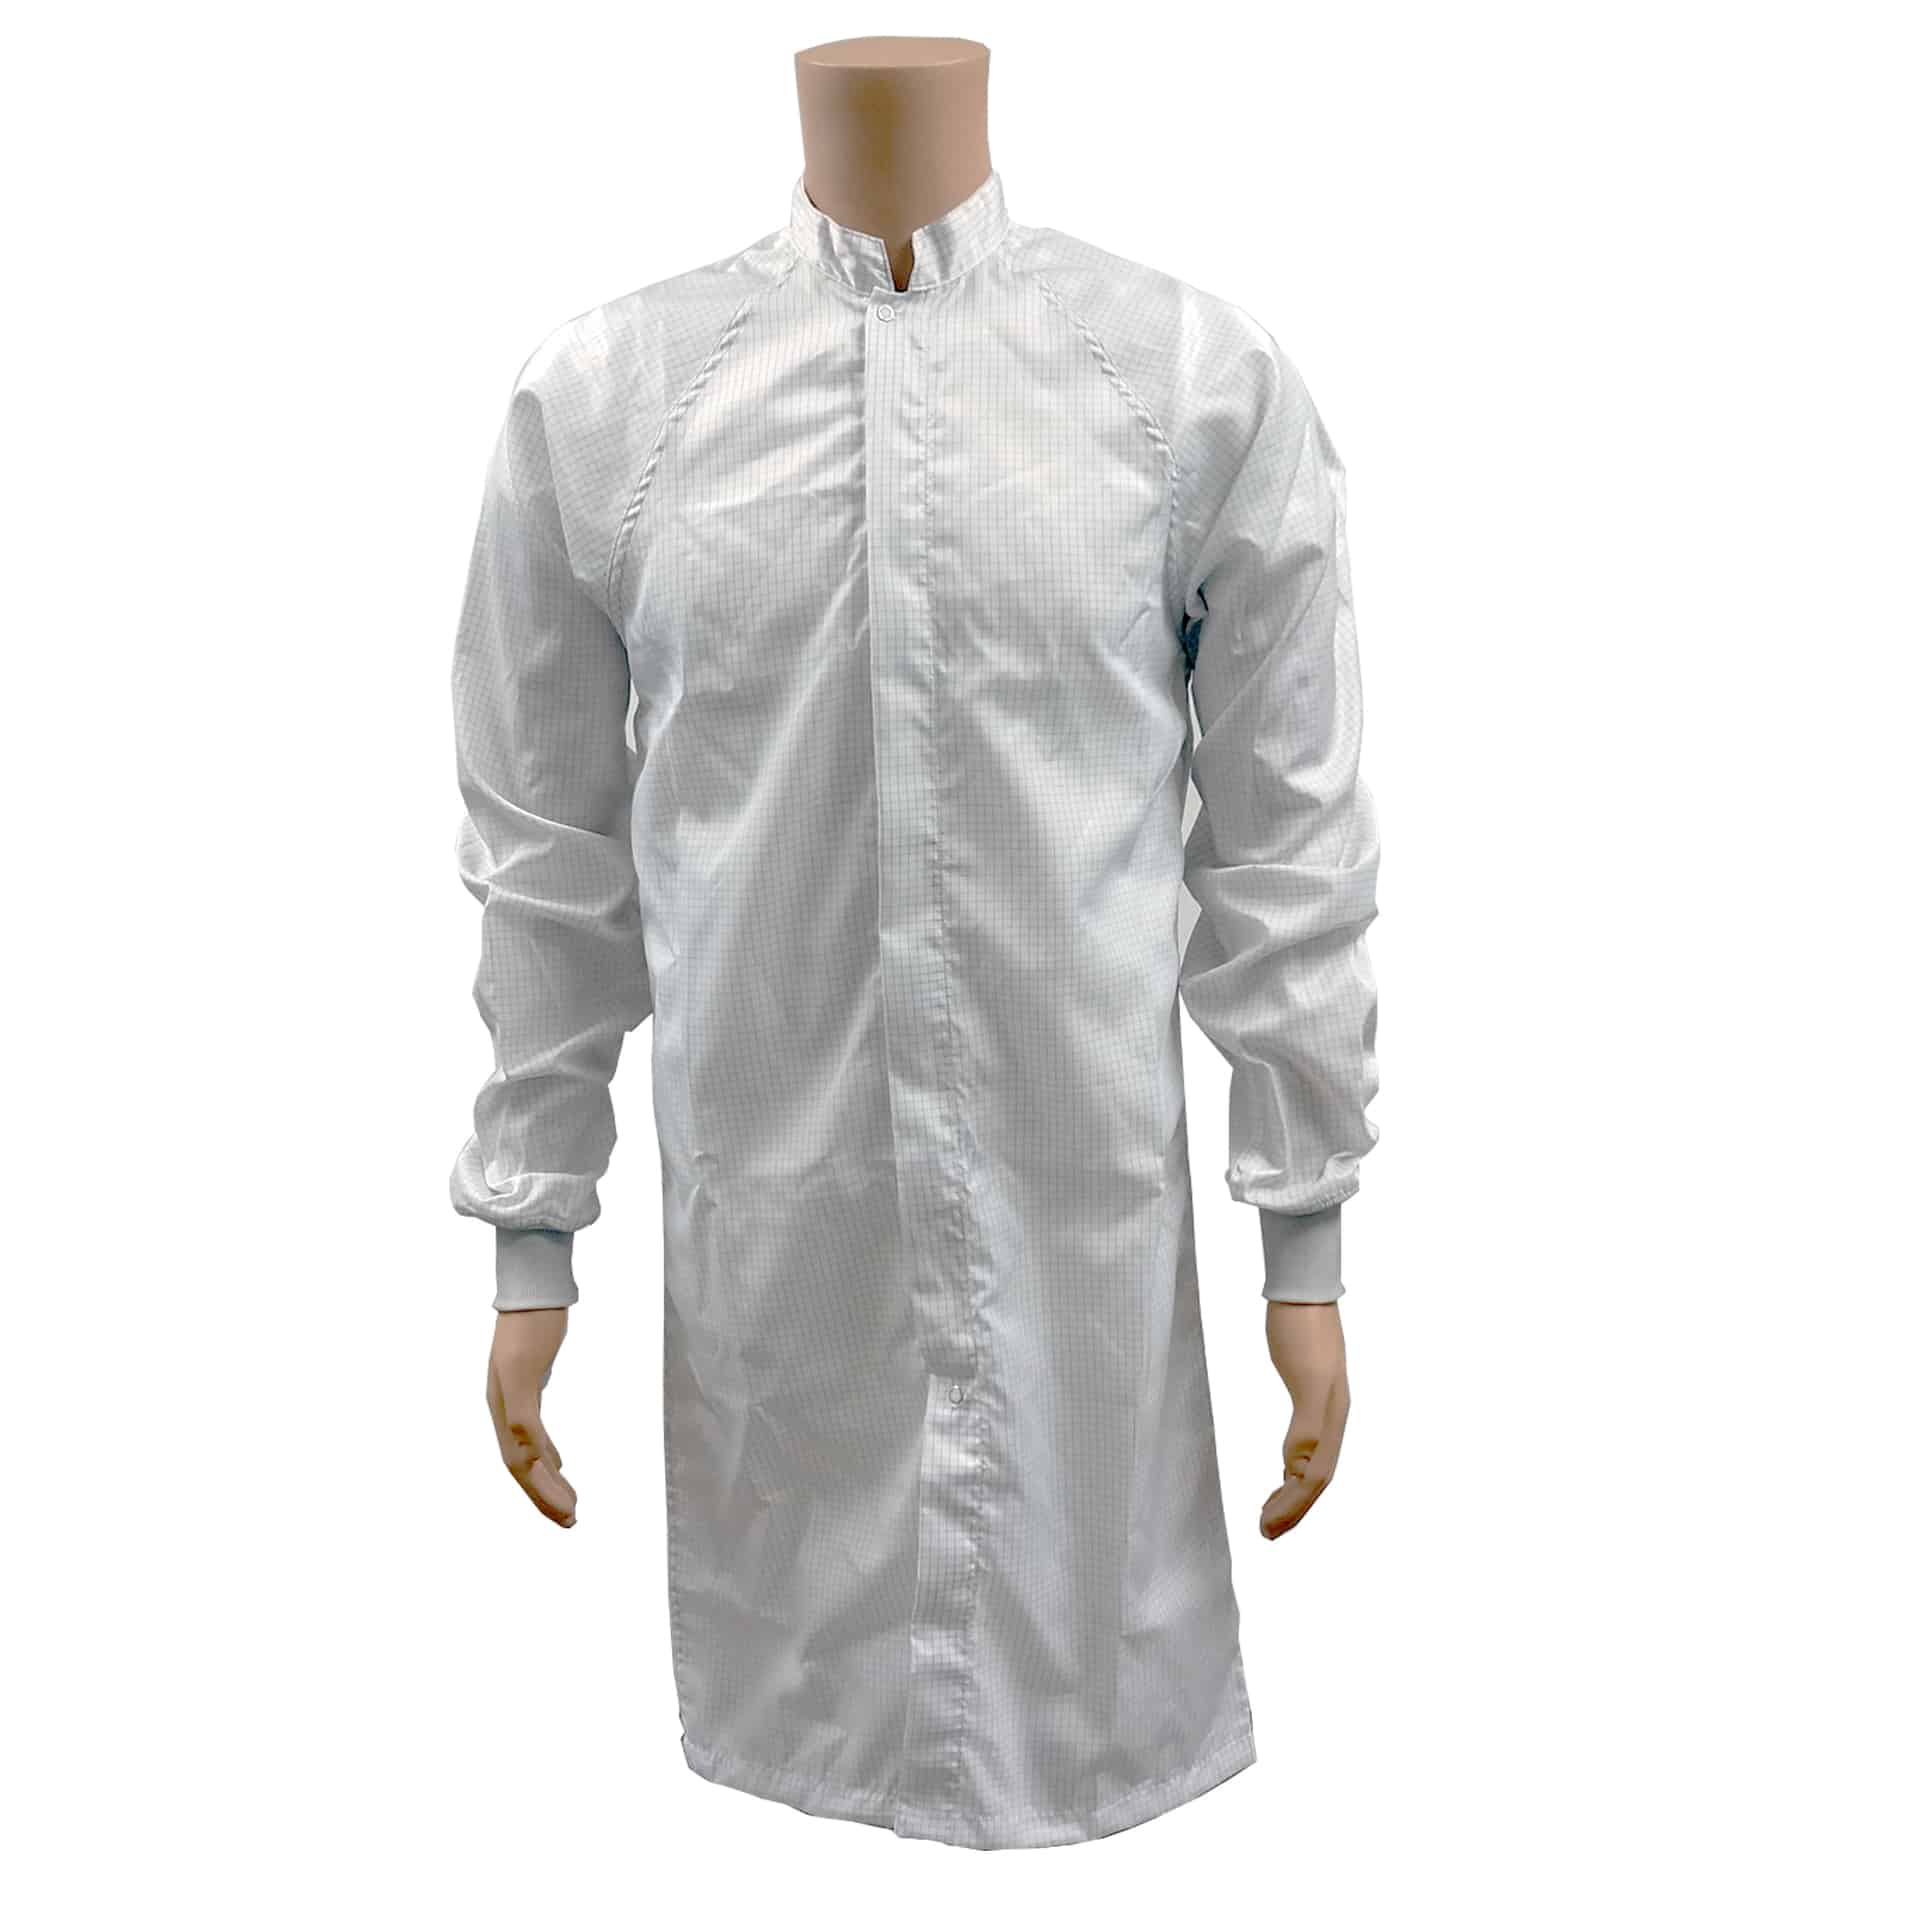 【DK-JLM6203WH】ESD CLEANROOM FROCK, WHITE, M